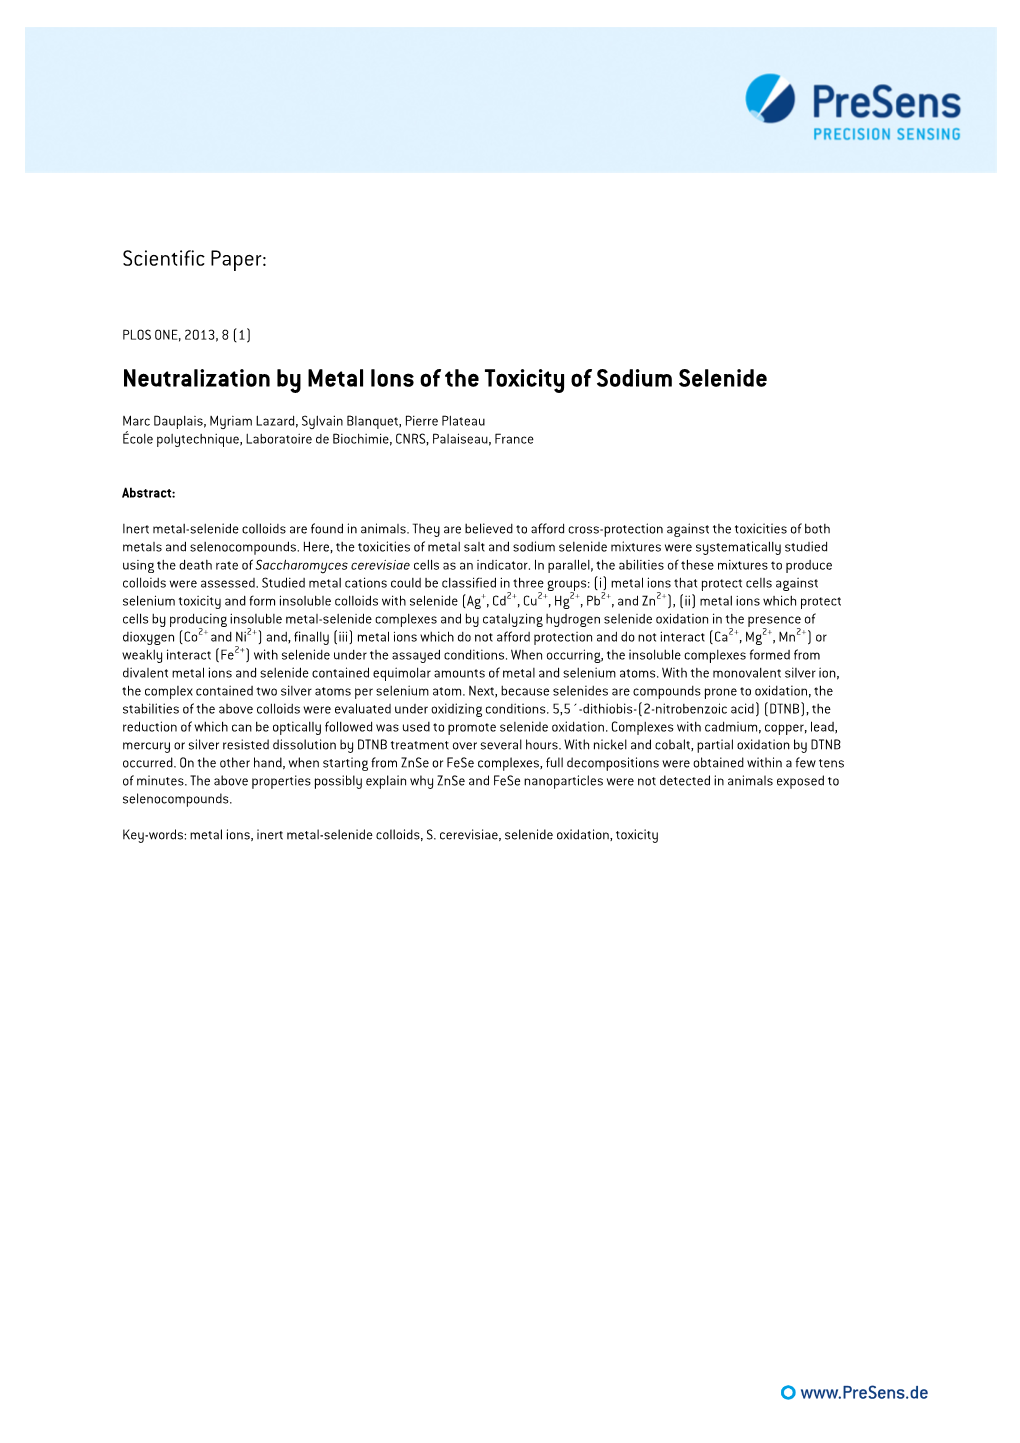 Neutralization by Metal Ions of the Toxicity of Sodium Selenide